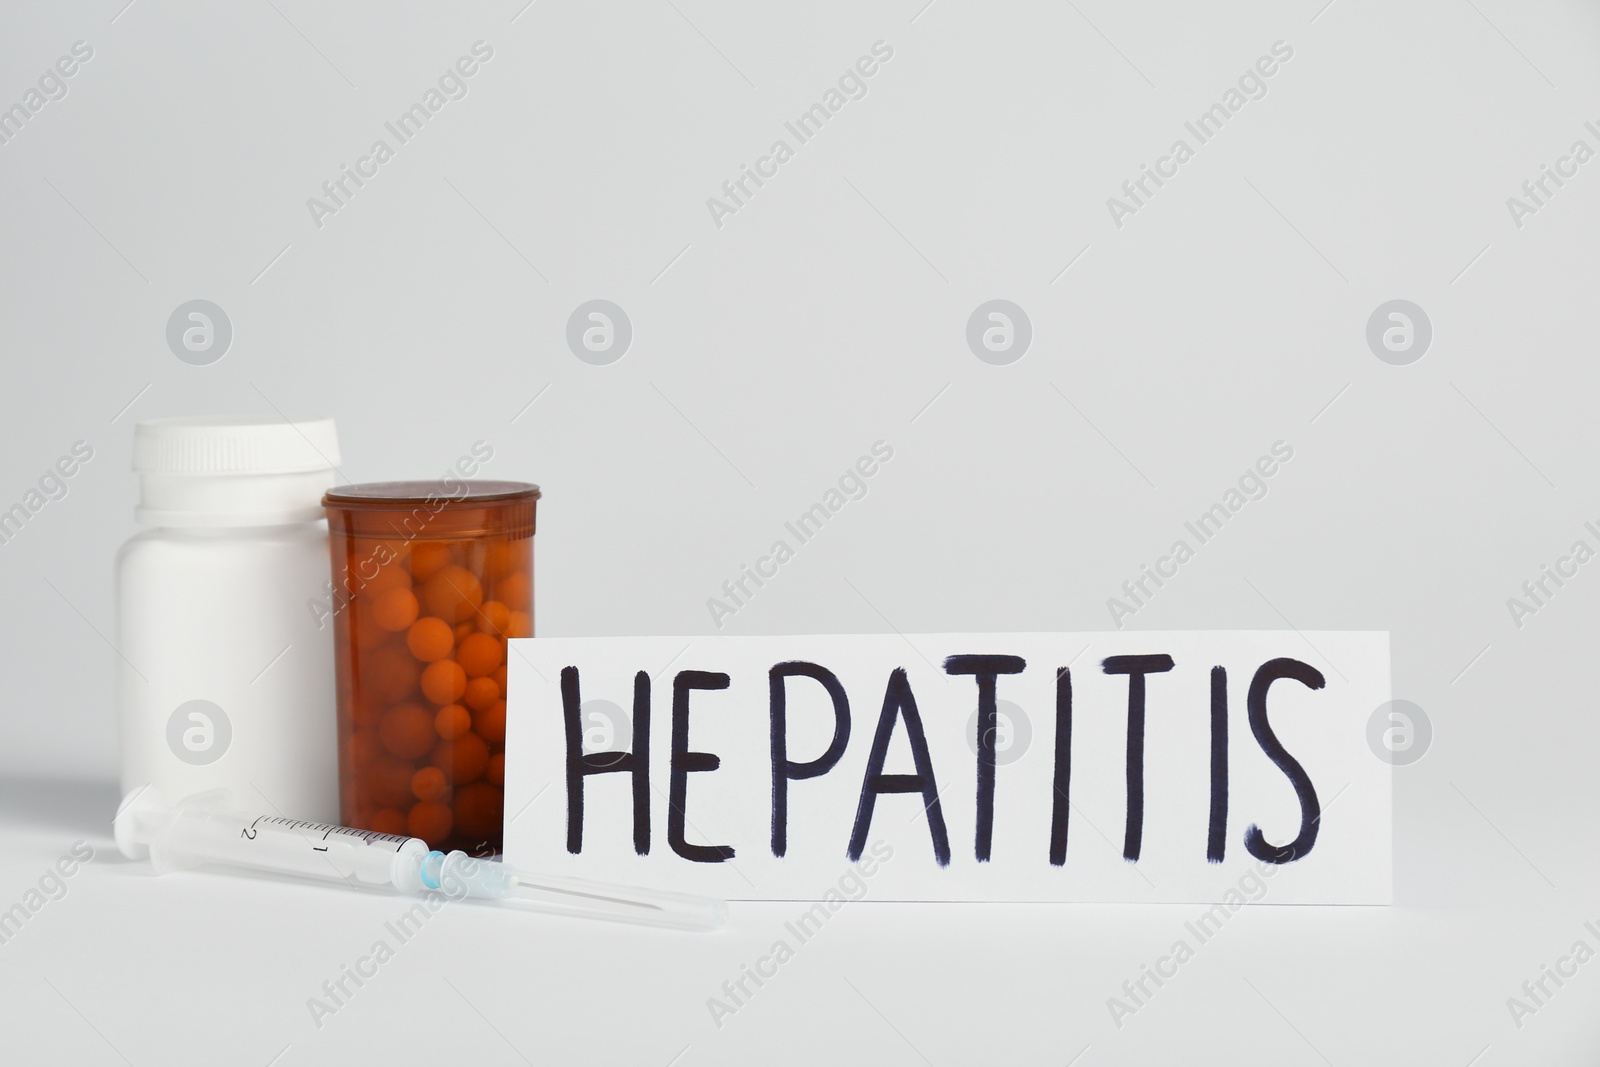 Photo of Word Hepatitis and bottles of pills on white background